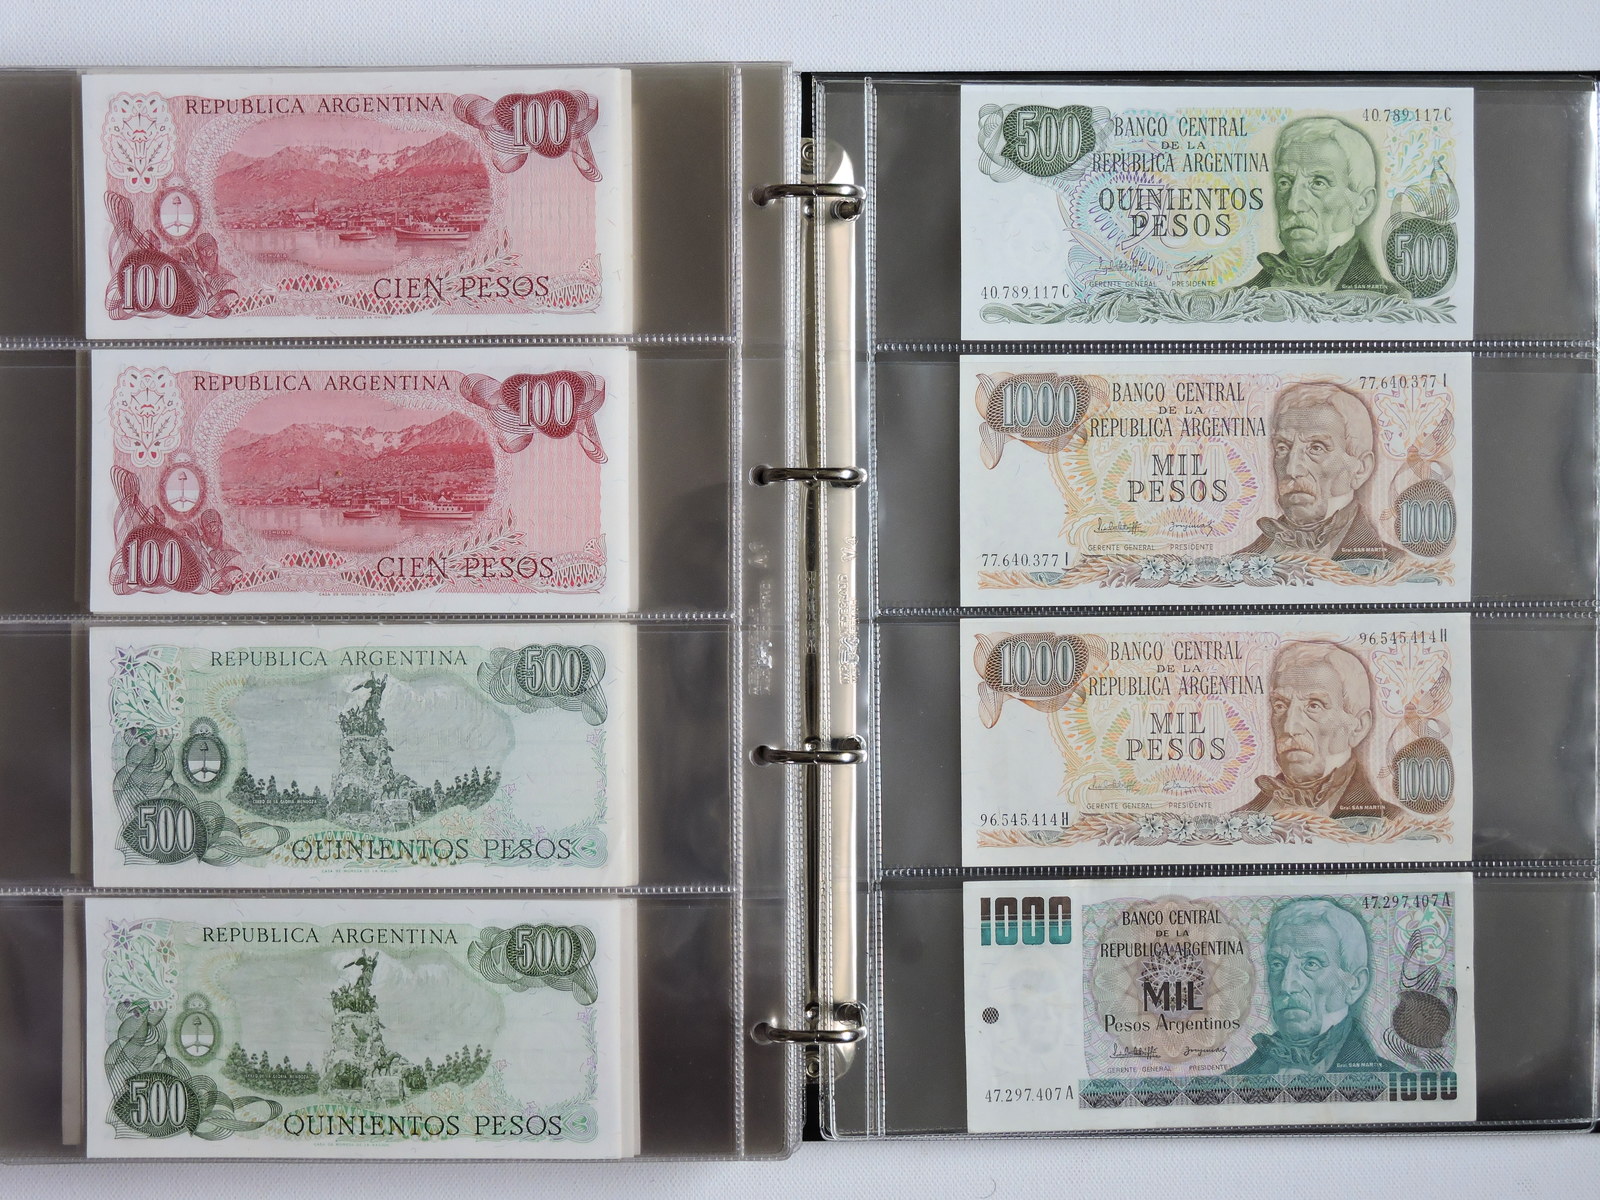 Banknotes, Brazil and Argentina
, page:39, item:1